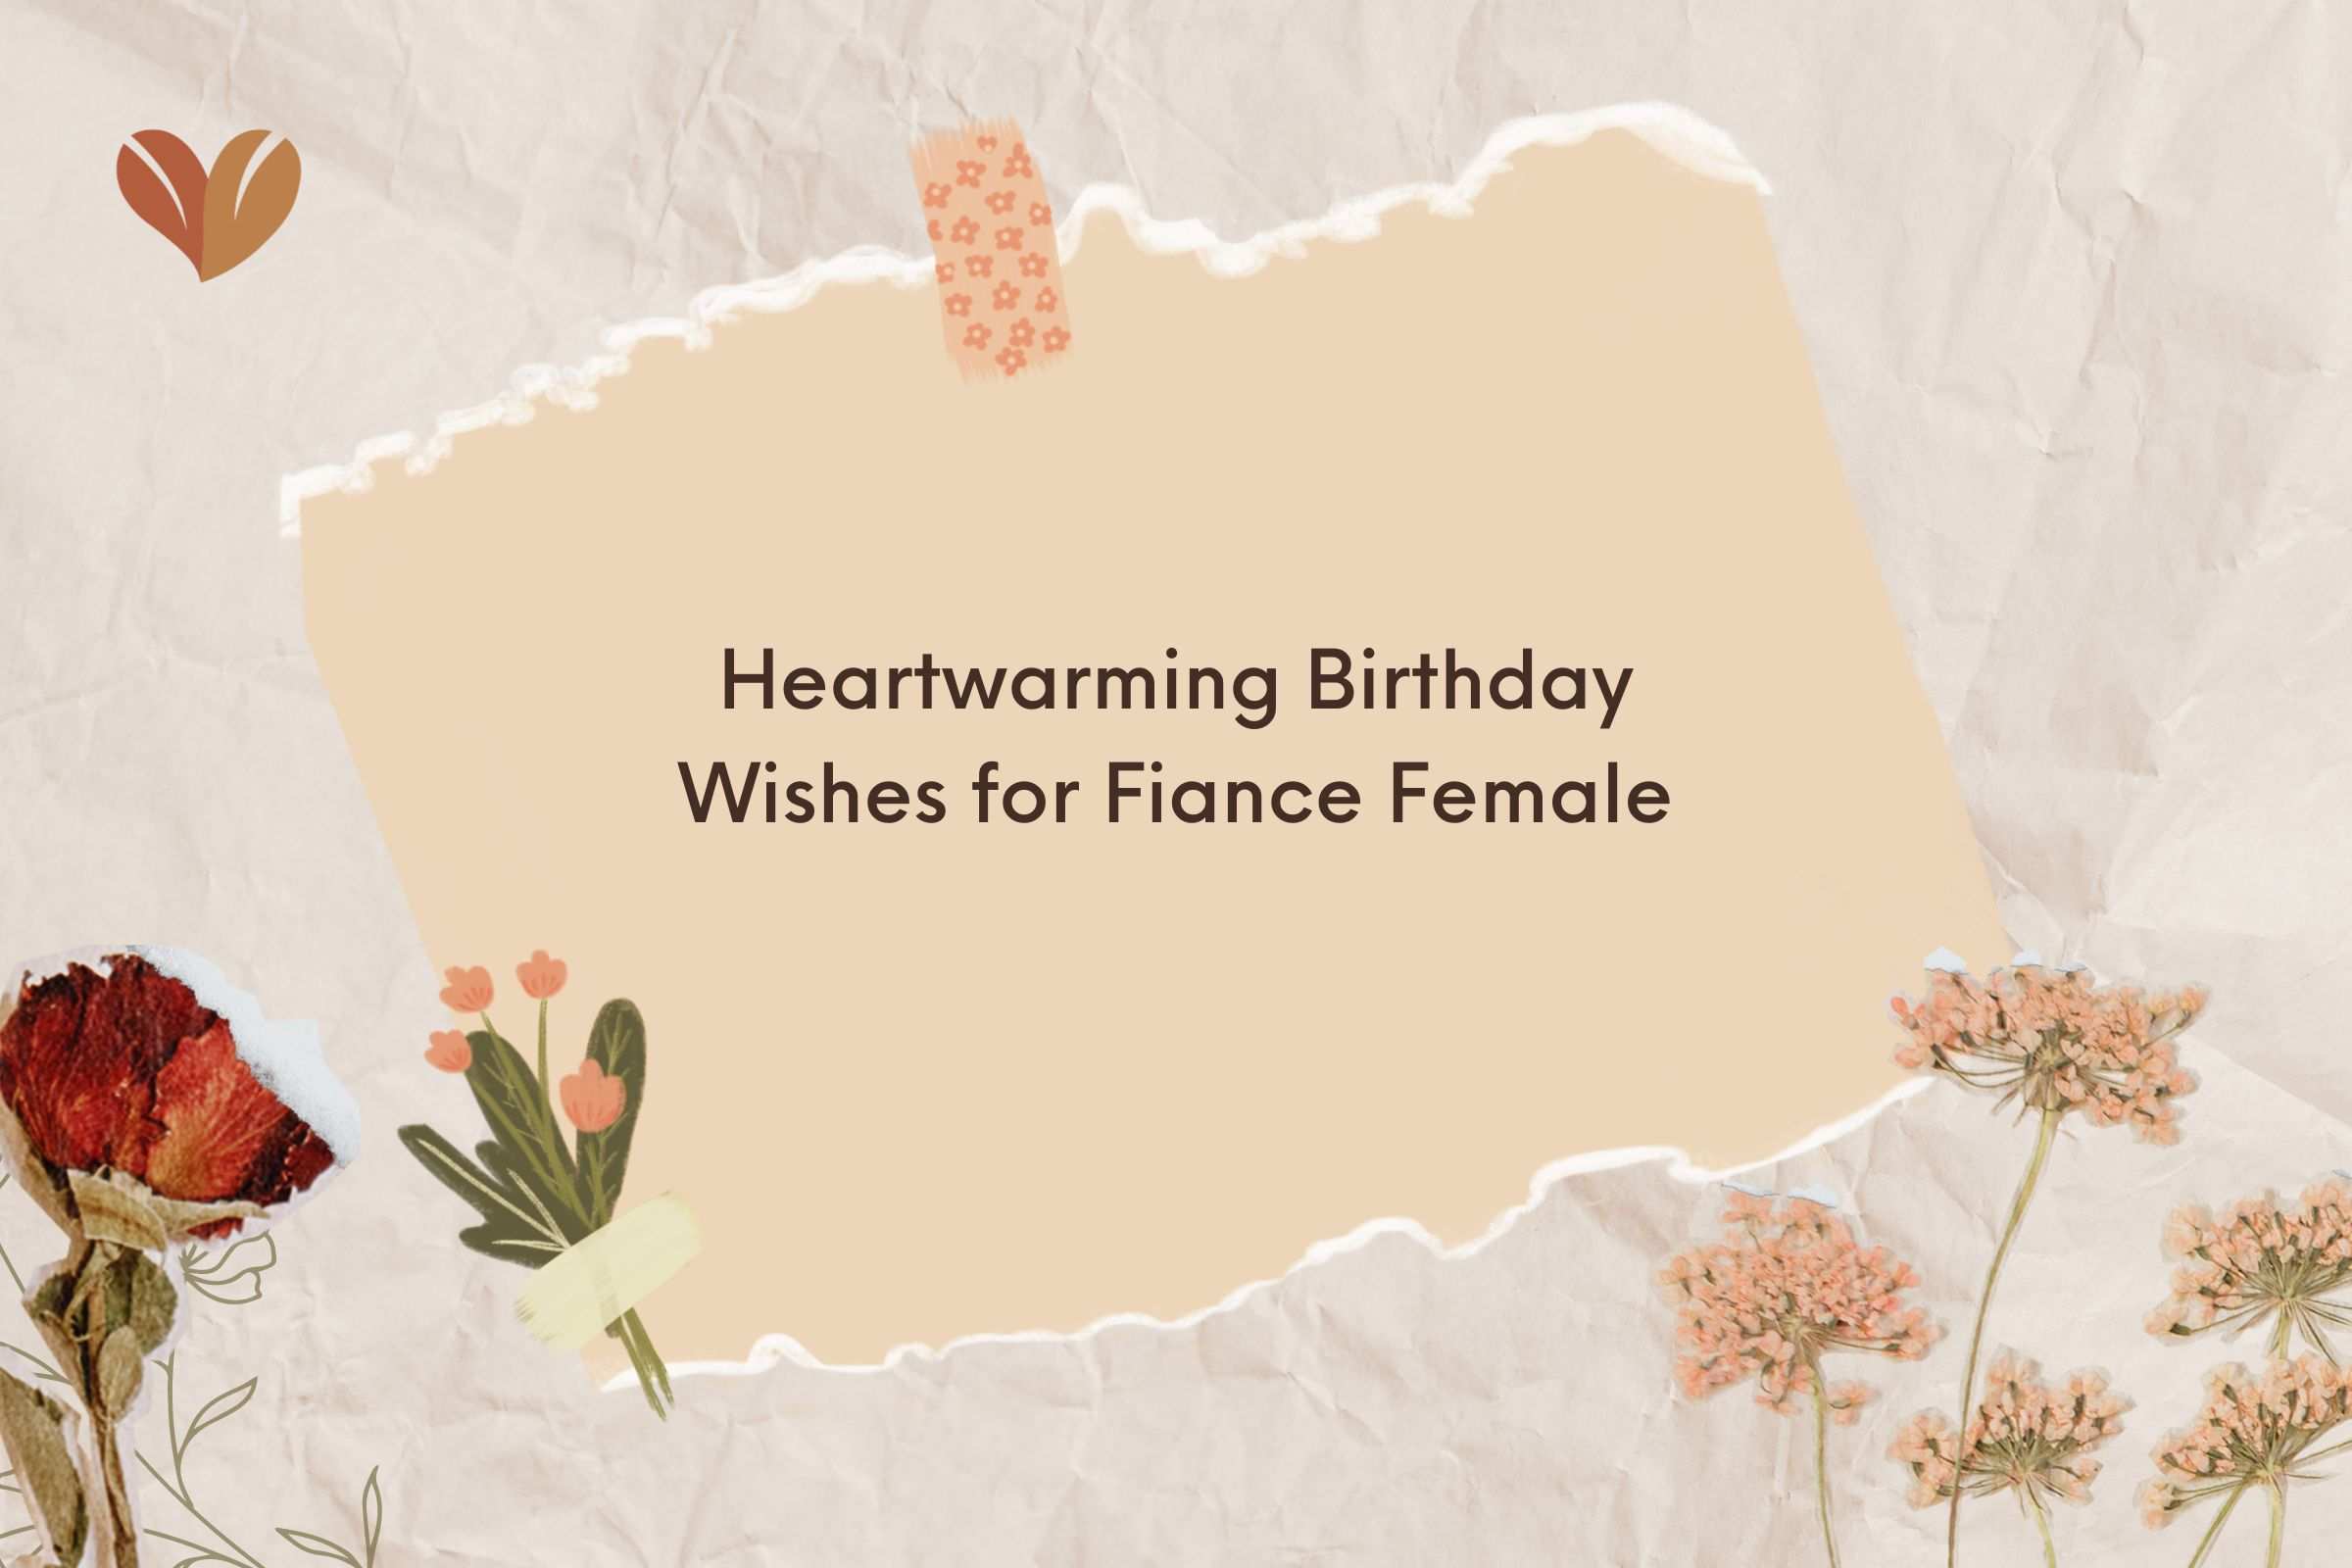 Heartwarming Birthday Wishes for Fiance Female